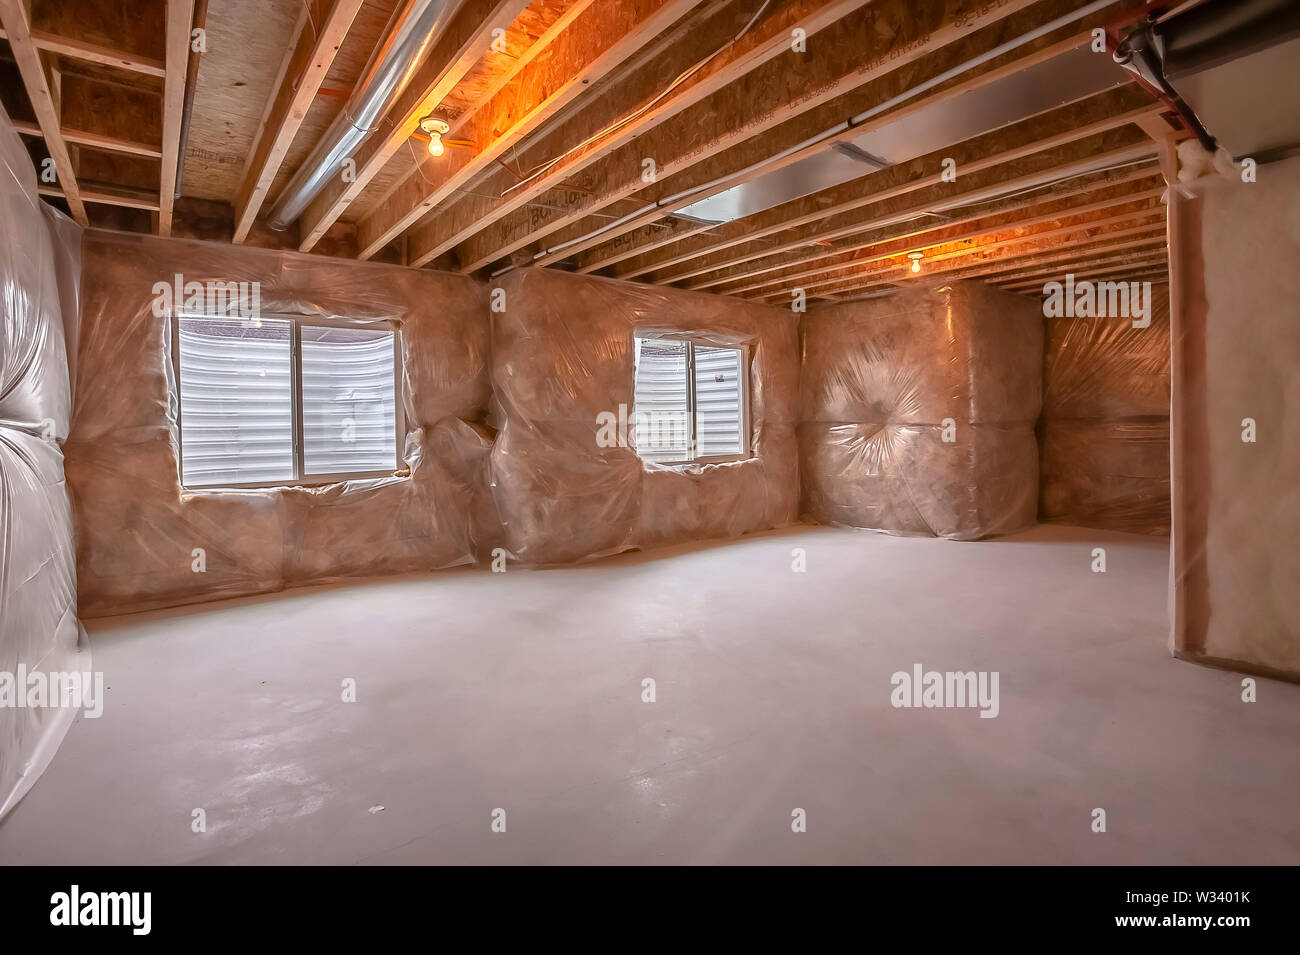 Windows And Air Conditioning Ducts Inside A New Home Under